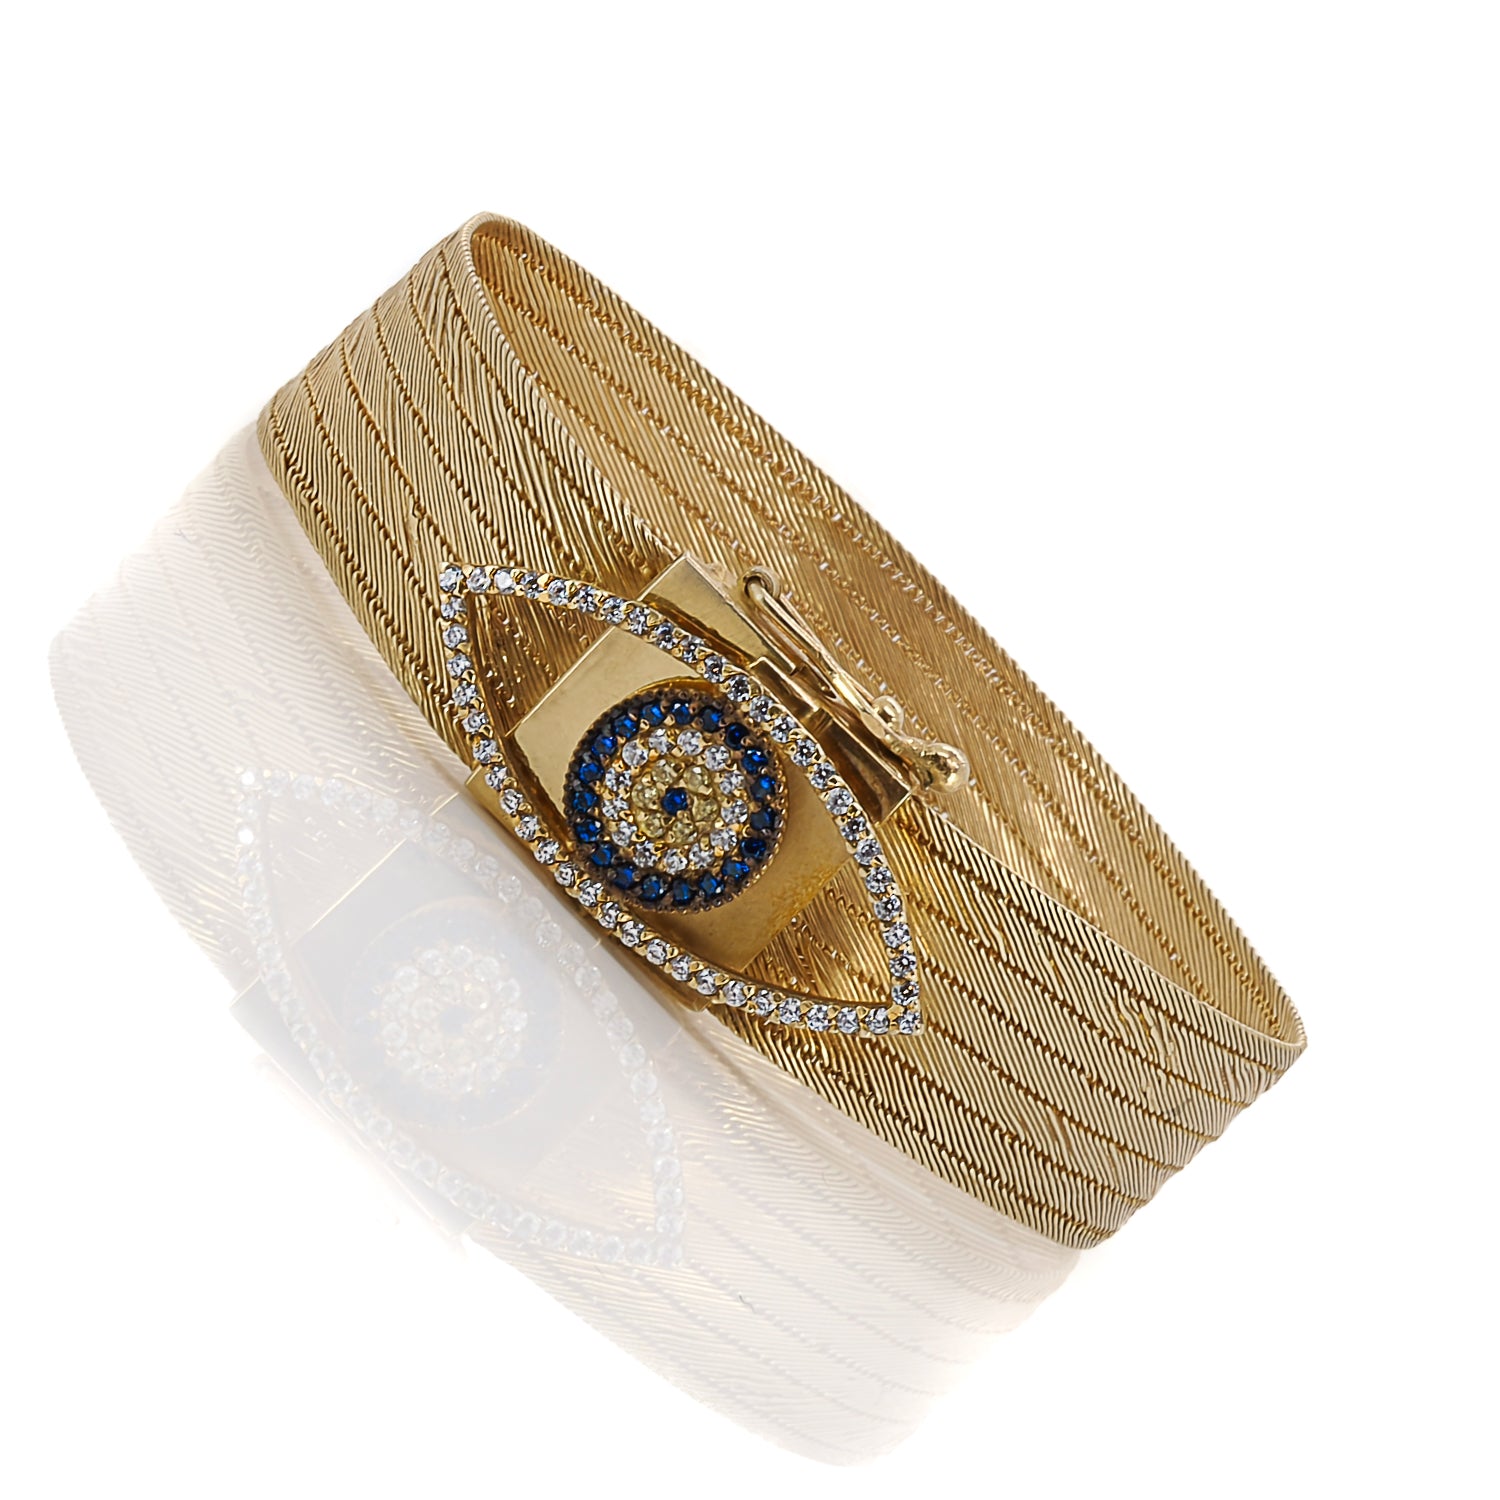 Sterling Silver with 24K Gold Plating - Craftsmanship and Uniqueness.